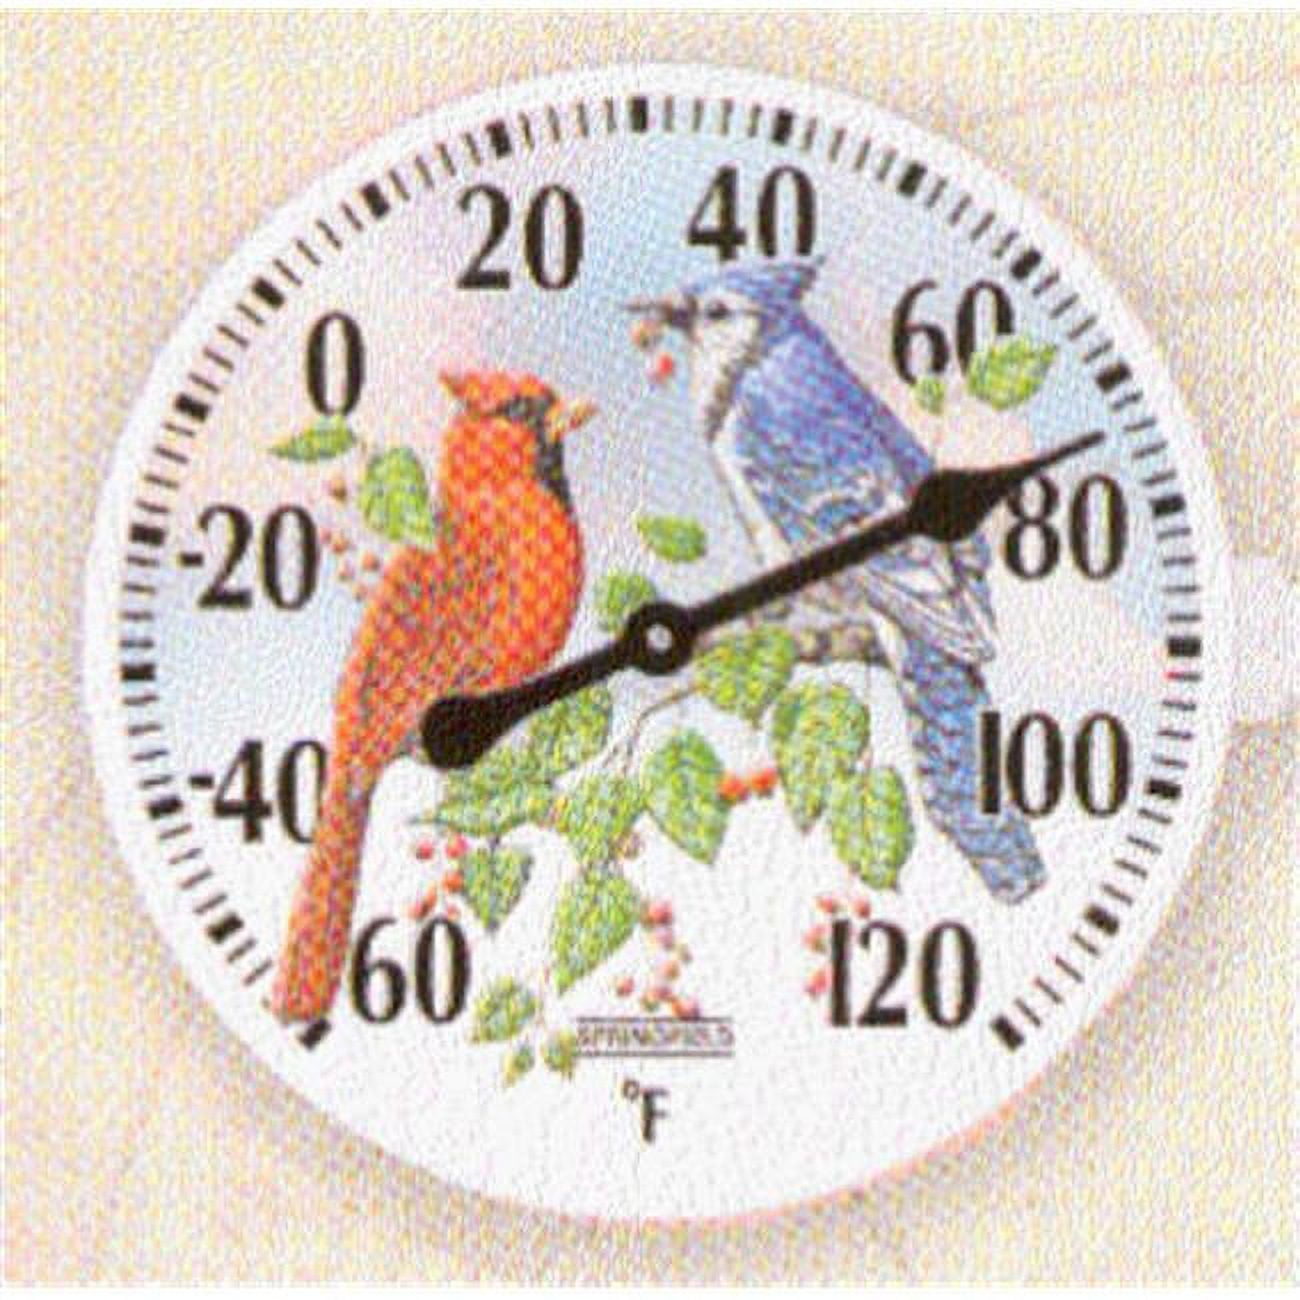  5630 Fits for Taylor 6 Round Dial Indoor/Outdoor Thermometer  w/Mounting Bracket : Patio, Lawn & Garden